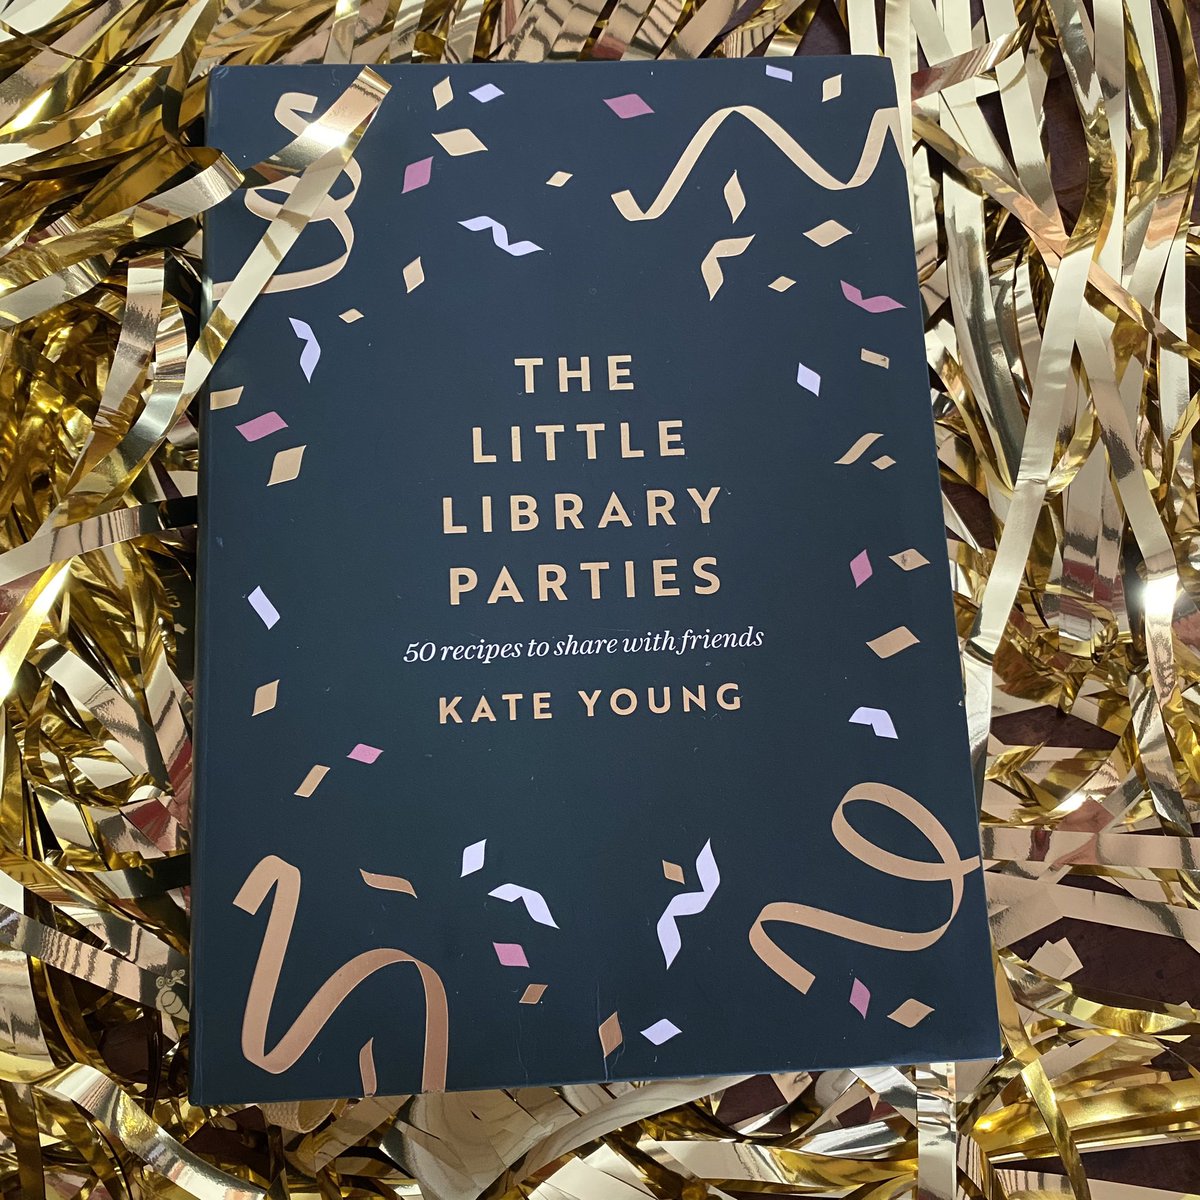 To celebrate our event ✨TONIGHT✨ with @bakingfiction we’ve popped a @bookshop_org_UK list here 🎉 uk.bookshop.org/lists/the-litt… + a playlist here 🎉 spoti.fi/3DCQn4o + last tickets here! 🎉 bit.ly/2X95tqQ